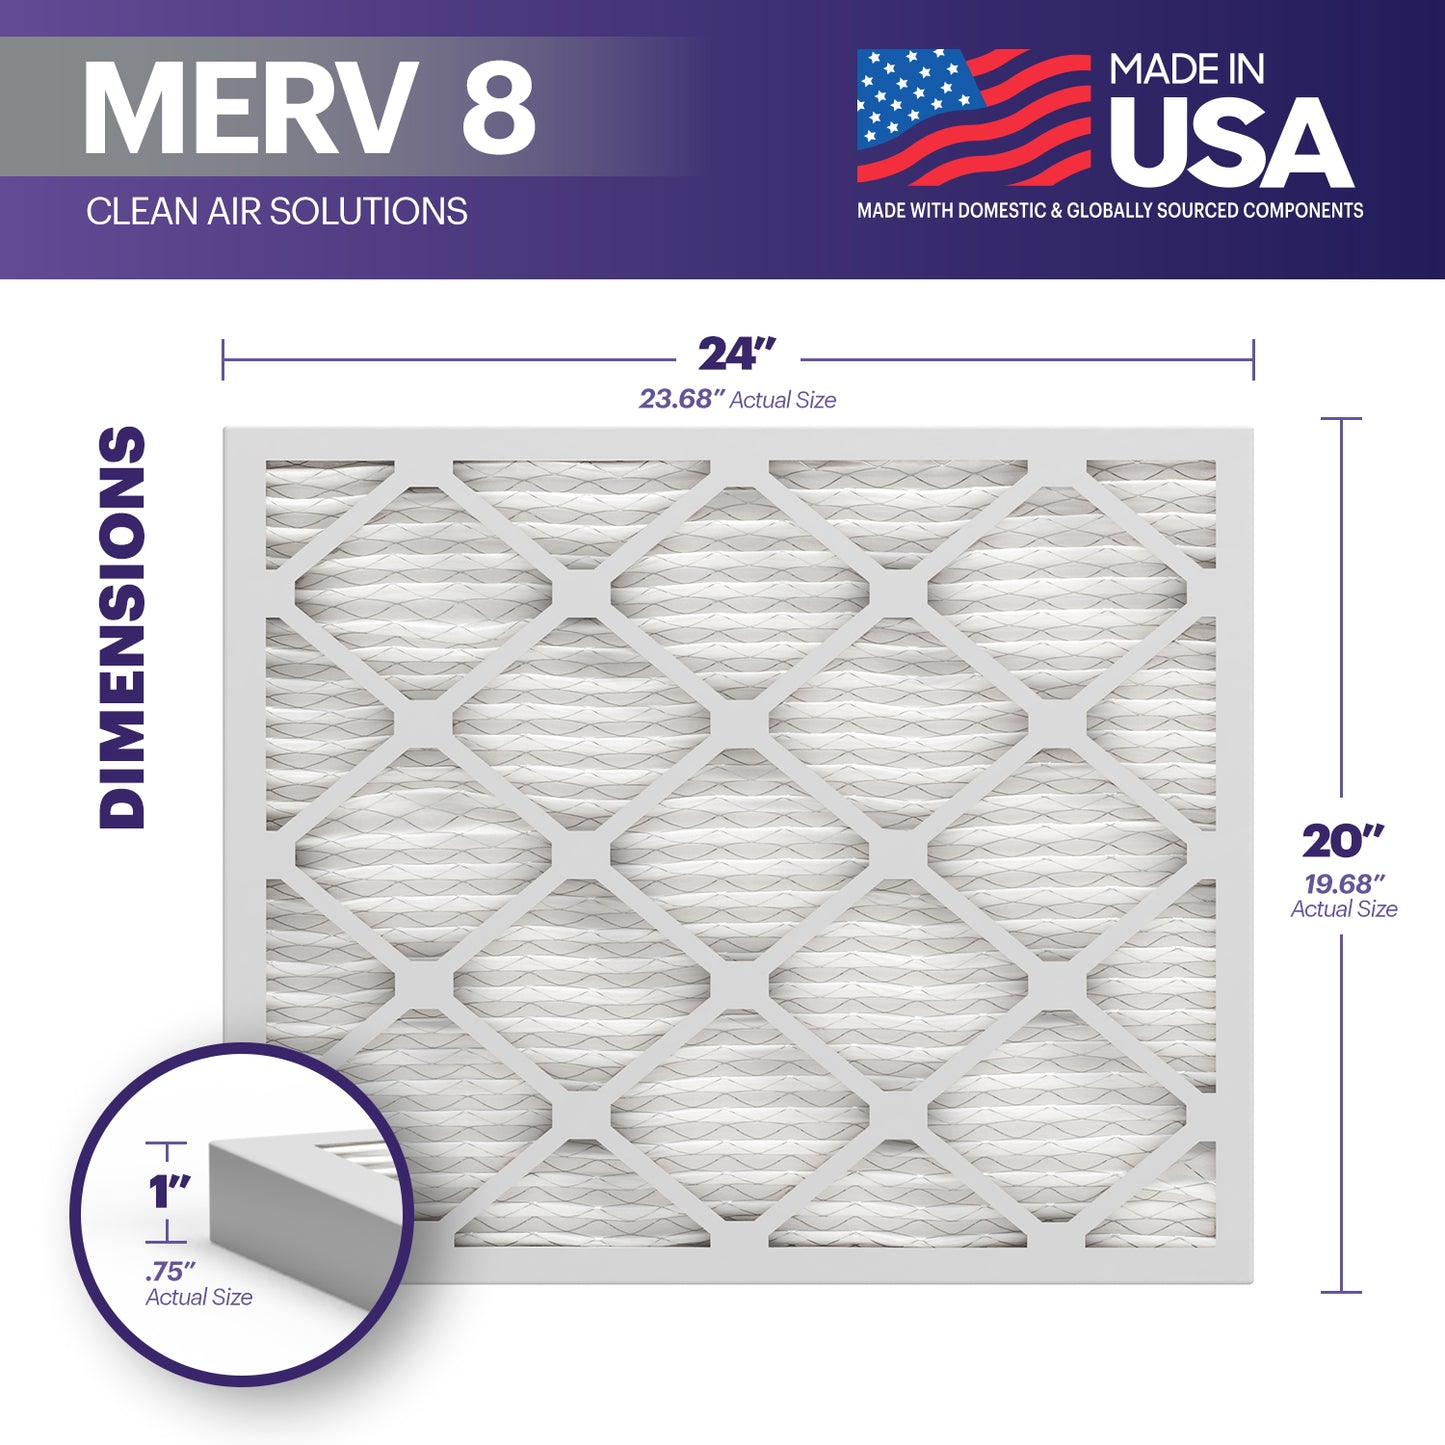 BNX TruFilter 20x24x1 MERV 8 Pleated Air Filter – Made in USA (6-Pack)